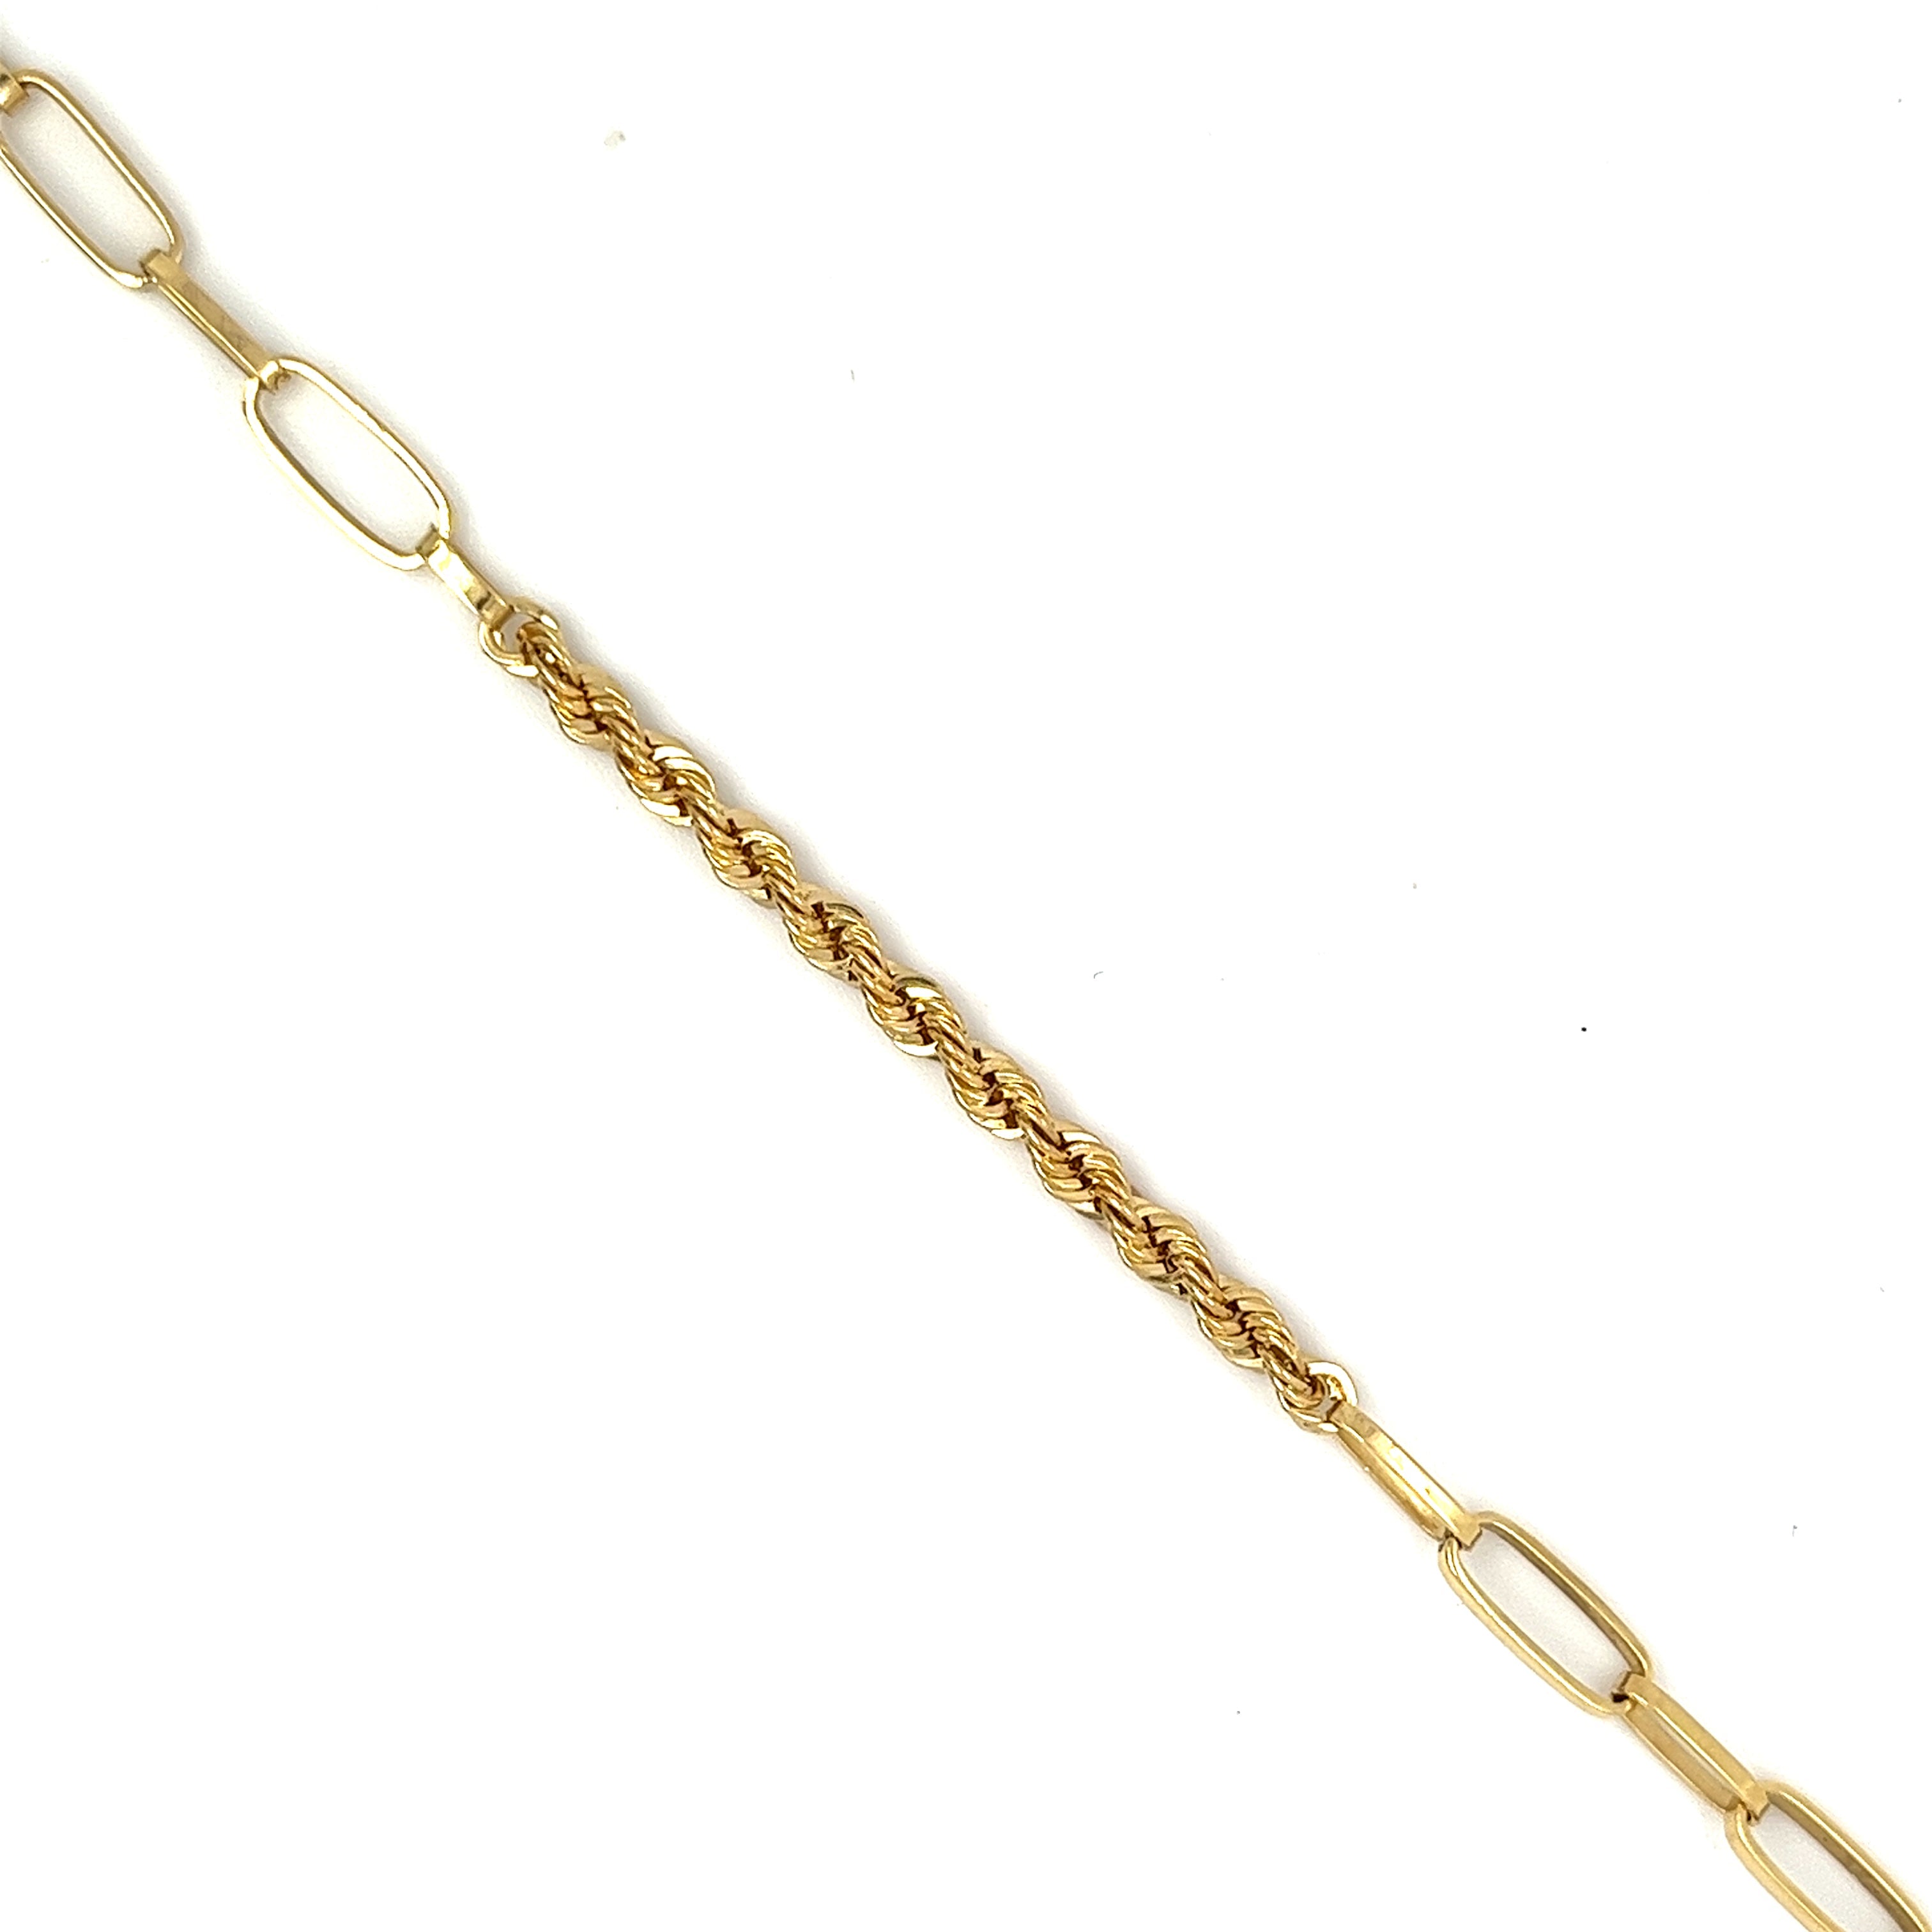 Magnificent Gold Linglong Bracelet with barids in 18K Yellow gold / MFT0381B/Y